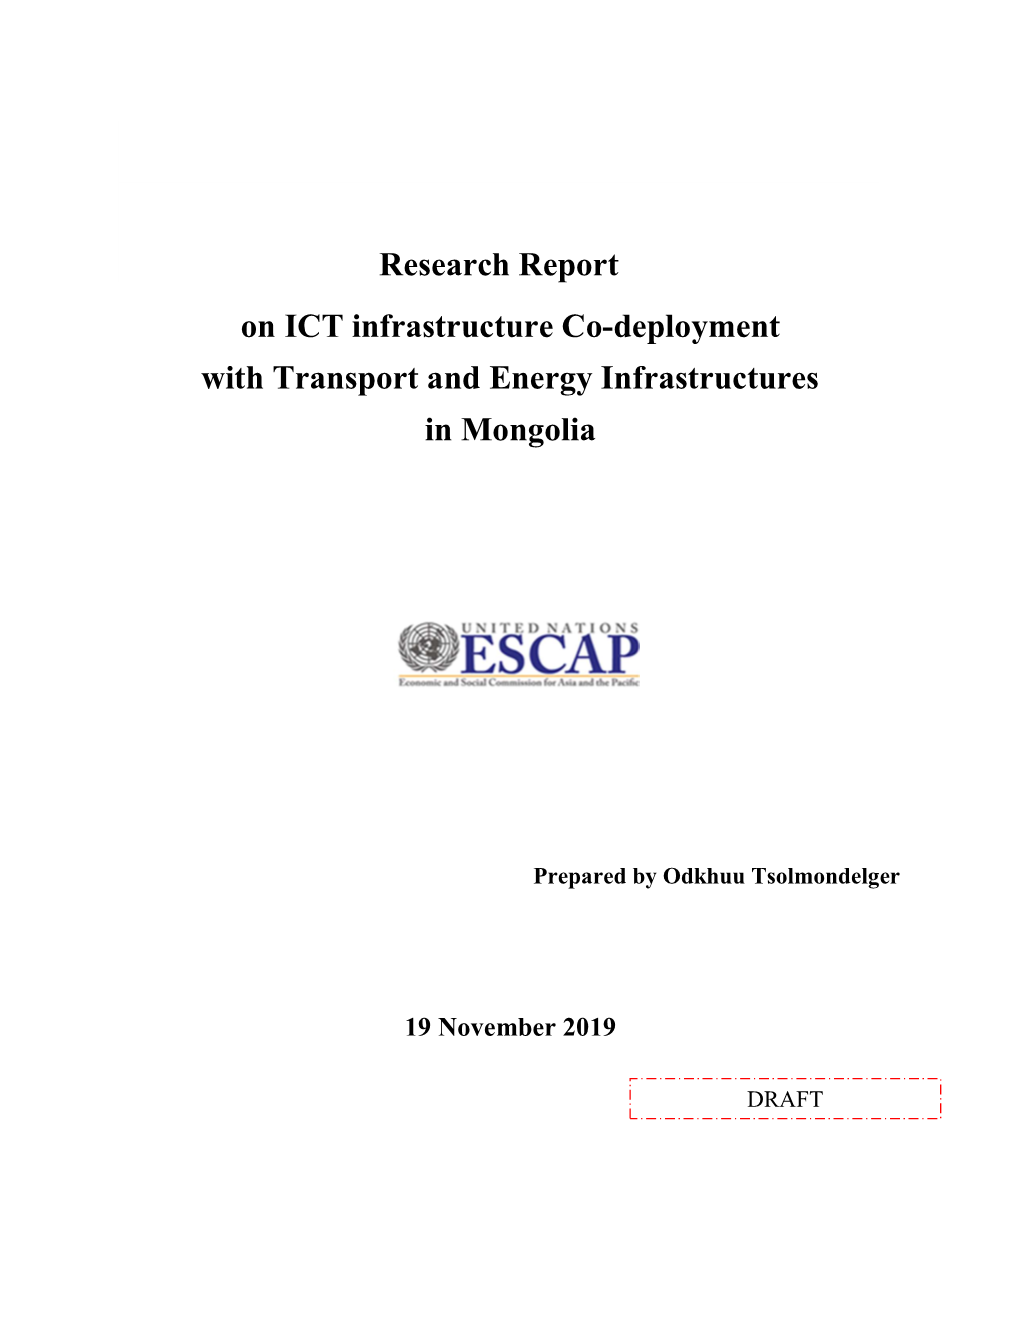 Research Report on ICT Infrastructure Co-Deployment with Transport and Energy Infrastructures in Mongolia